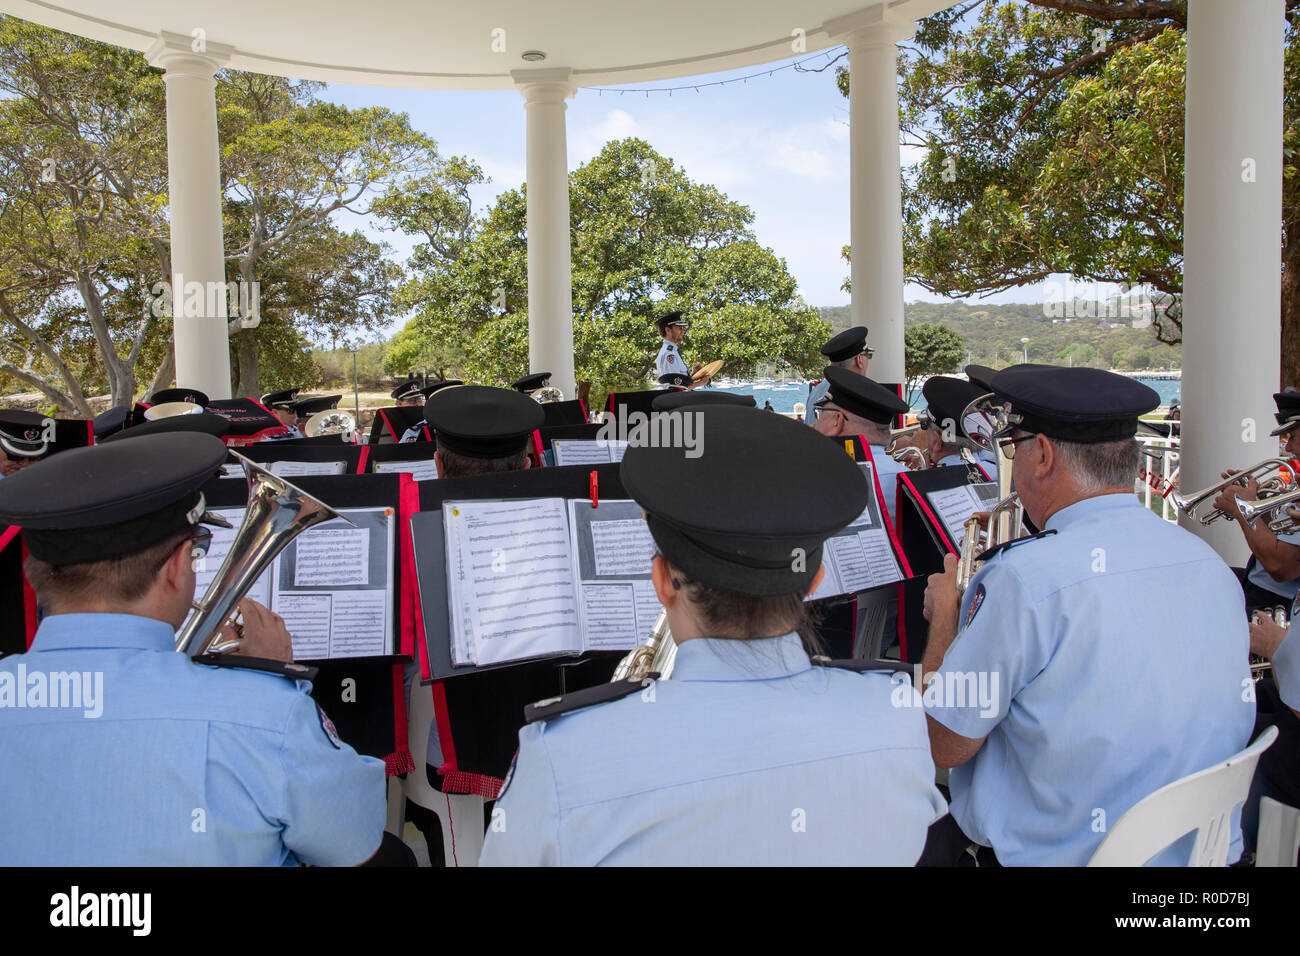 Sydney, Australia. 4th November, 2018. Balmoral Beach, NSW Fire and Rescue Band and Marching team perform at the rotunda in Balmoral Reserve, on Sunday 4th November 2018, Sydney,Australia Credit: martin berry/Alamy Live News Stock Photo